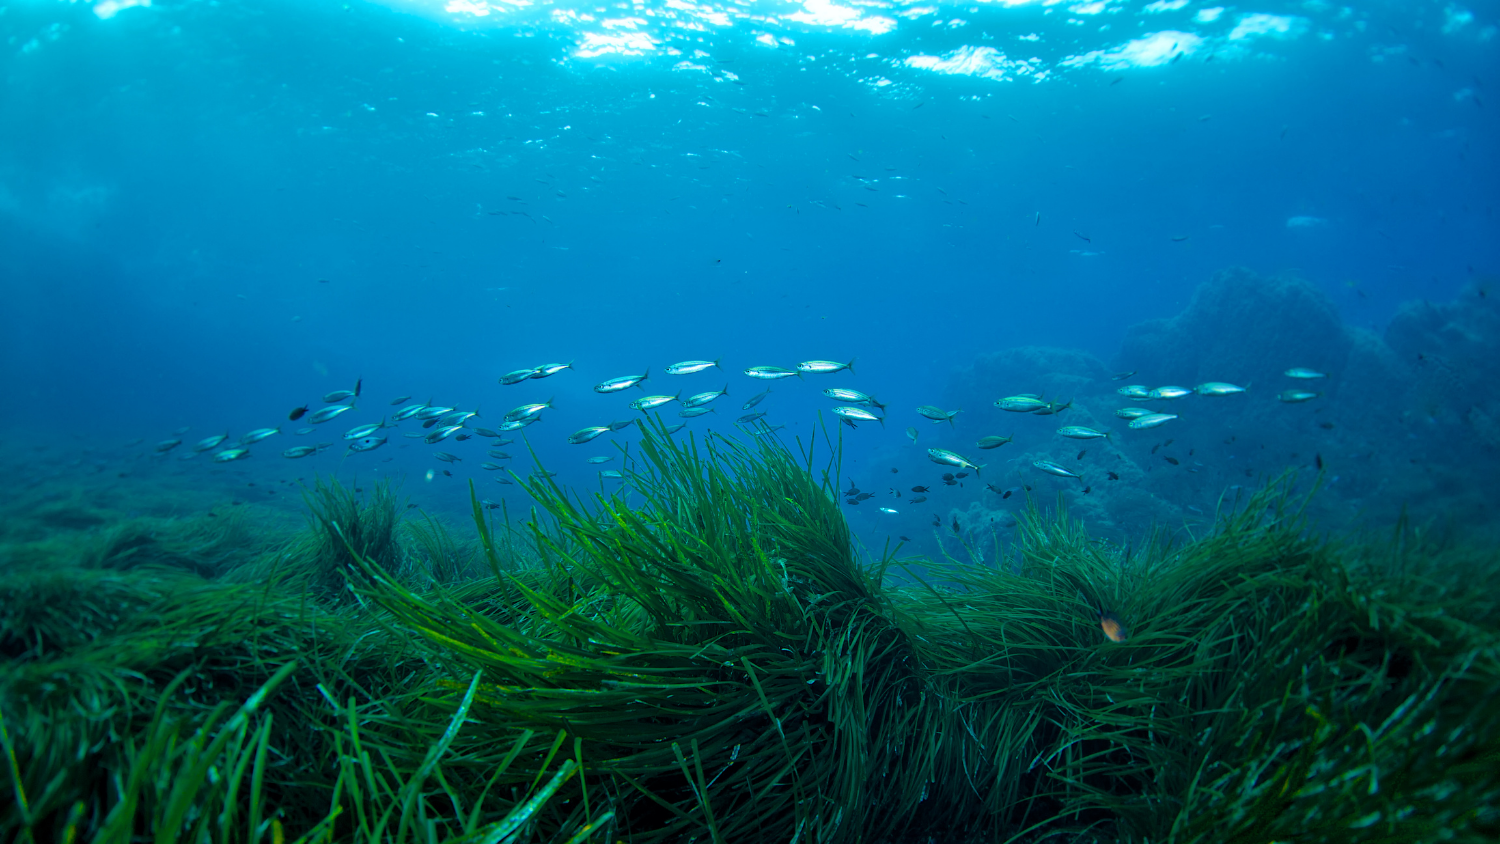 Seagrasses with fish